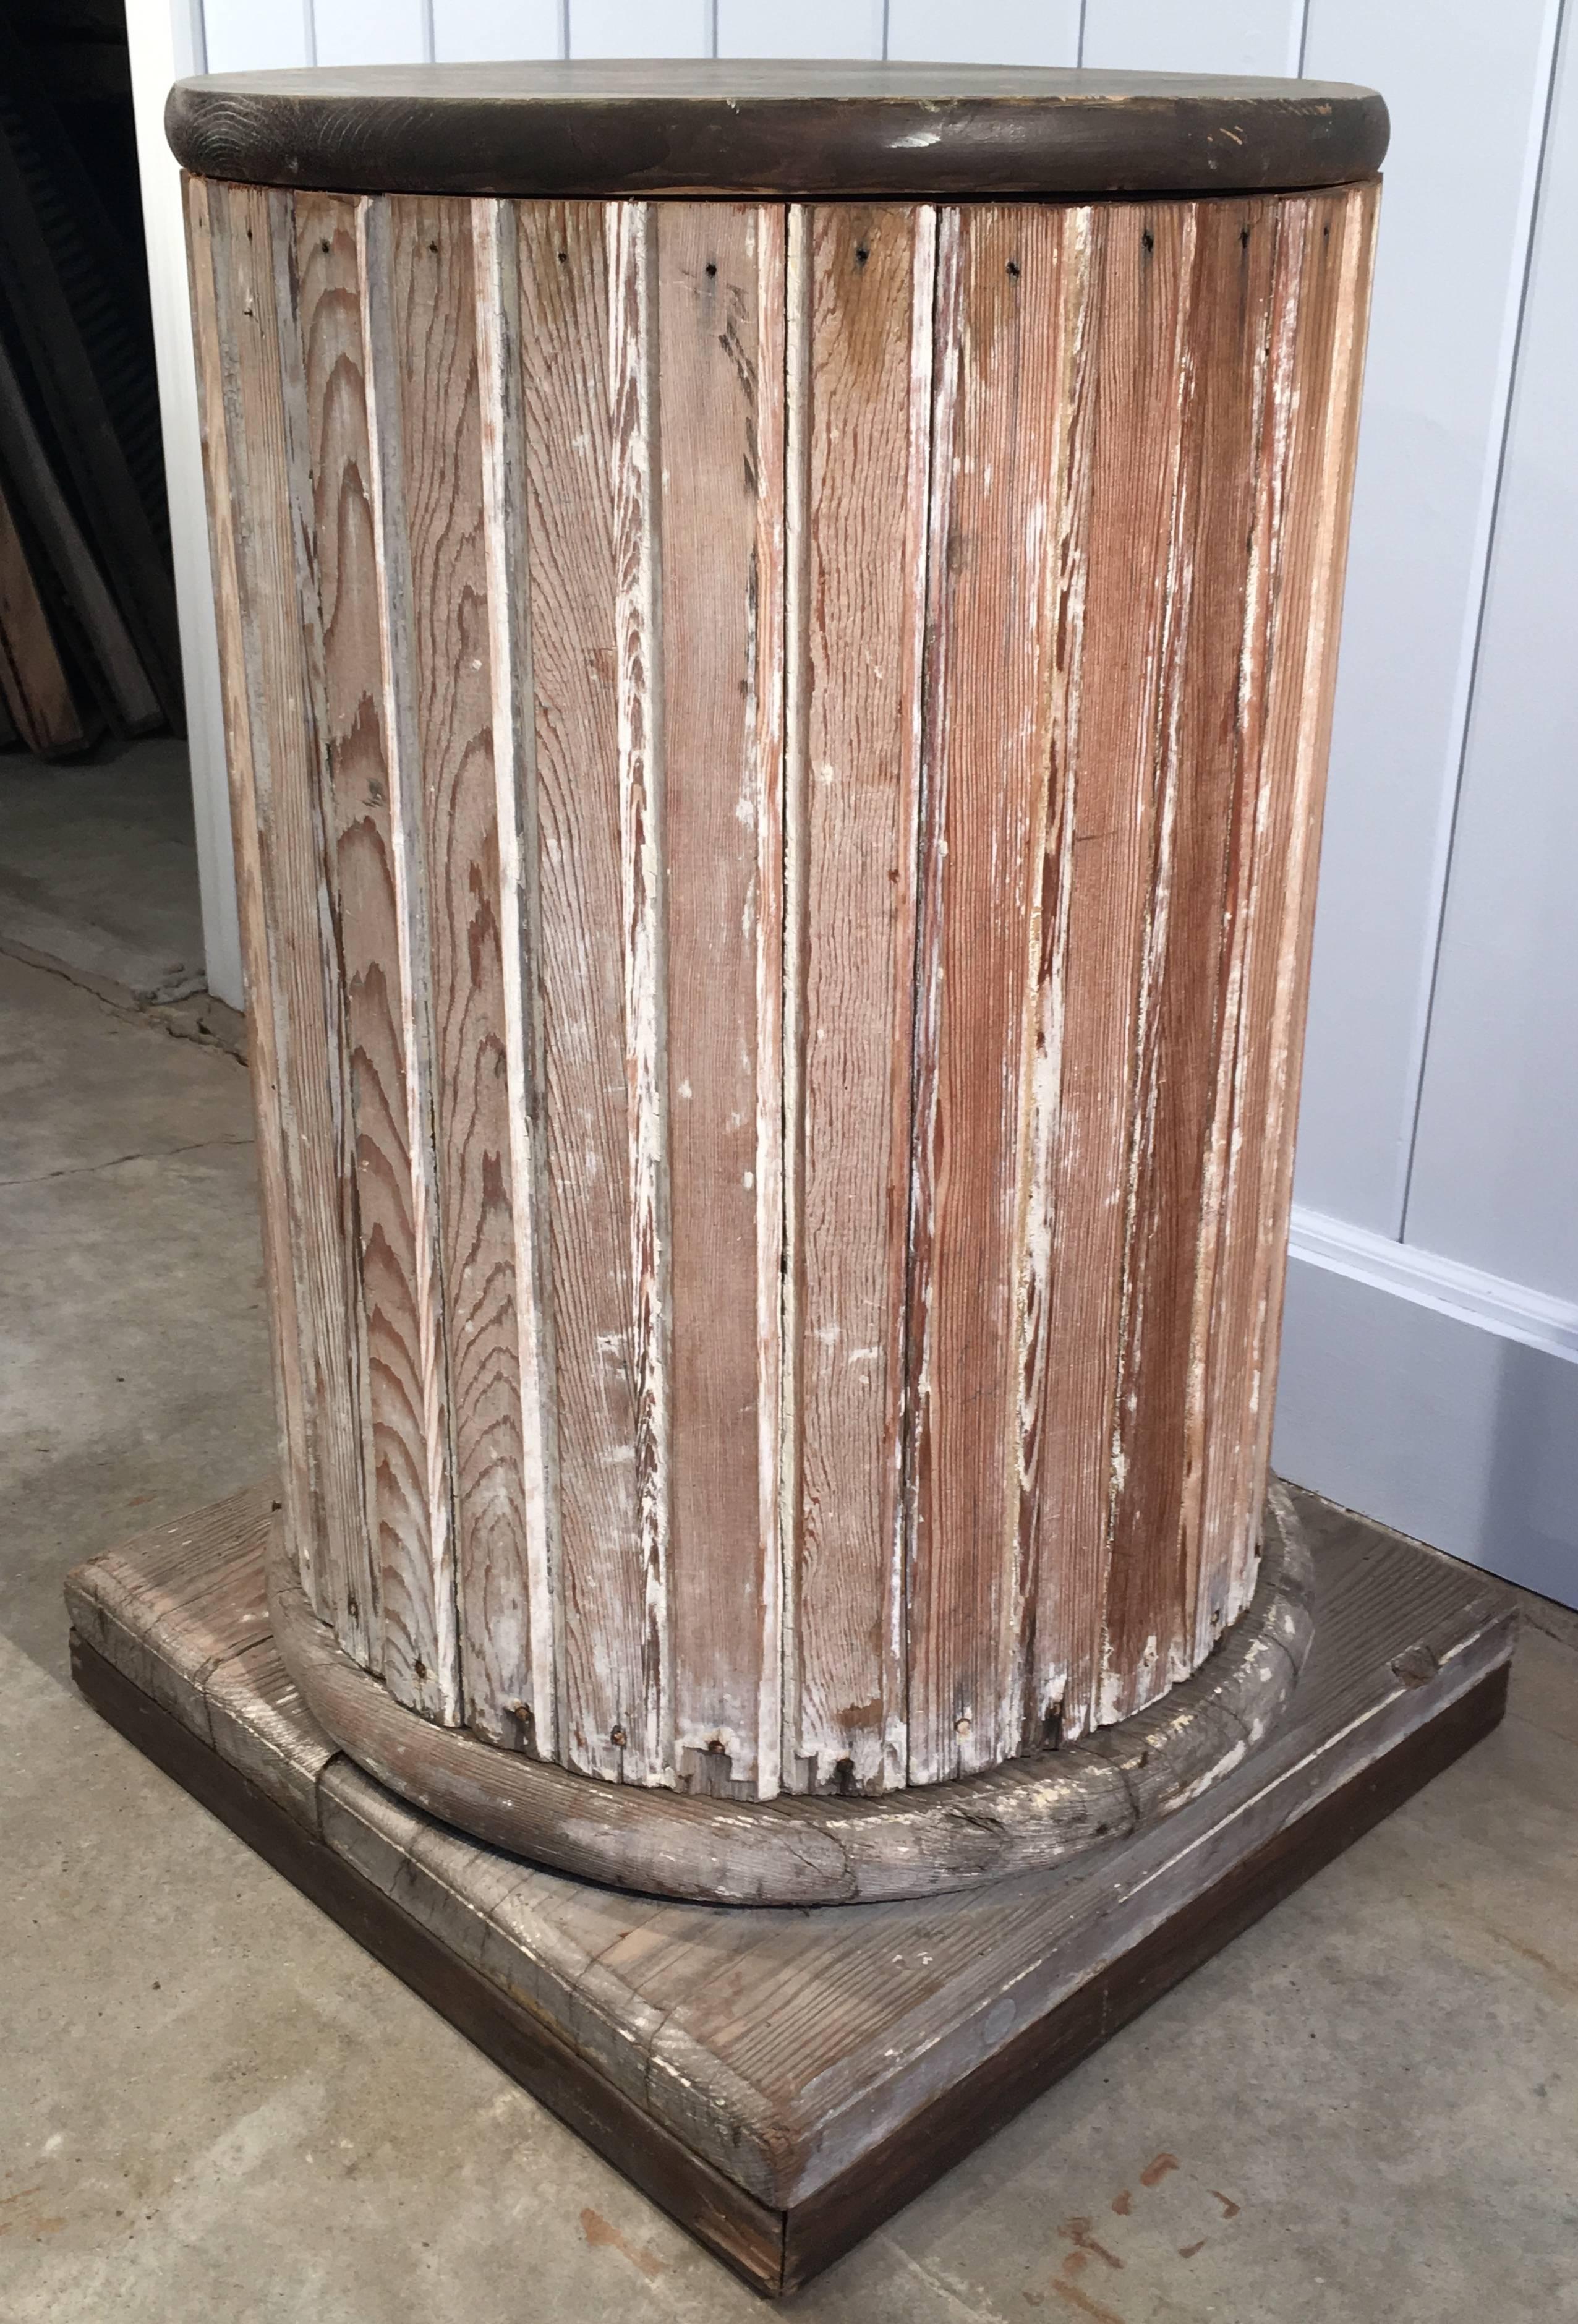 This handmade round wooden pedestal with square foot has a lovely scraped paint surface and the size makes it extremely versatile for holding a large pot, statue or urn. In fact we have had pieces that weigh over 200 pounds on it. In good condition,